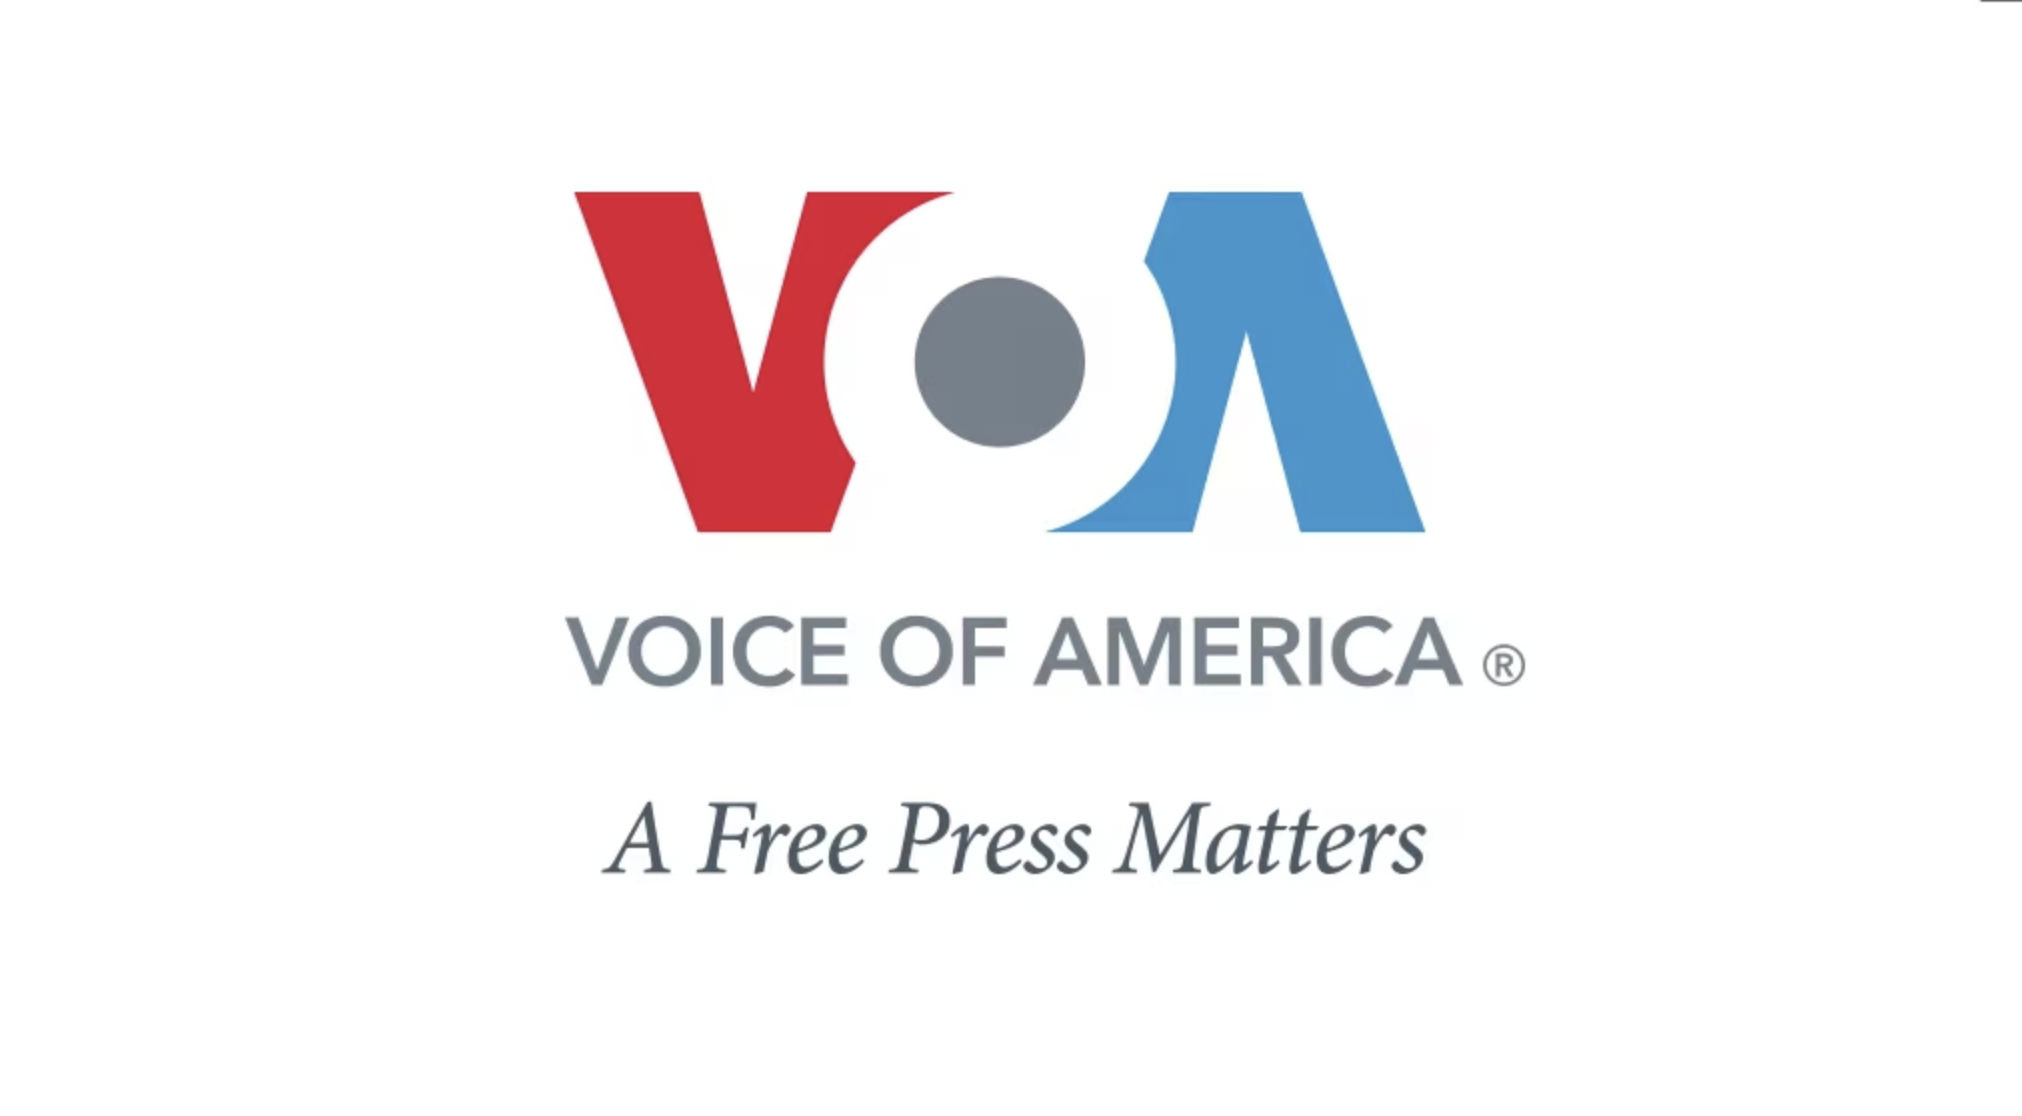 VOA statement on denying clearance for journalists in advance of Zimbabwe Elections